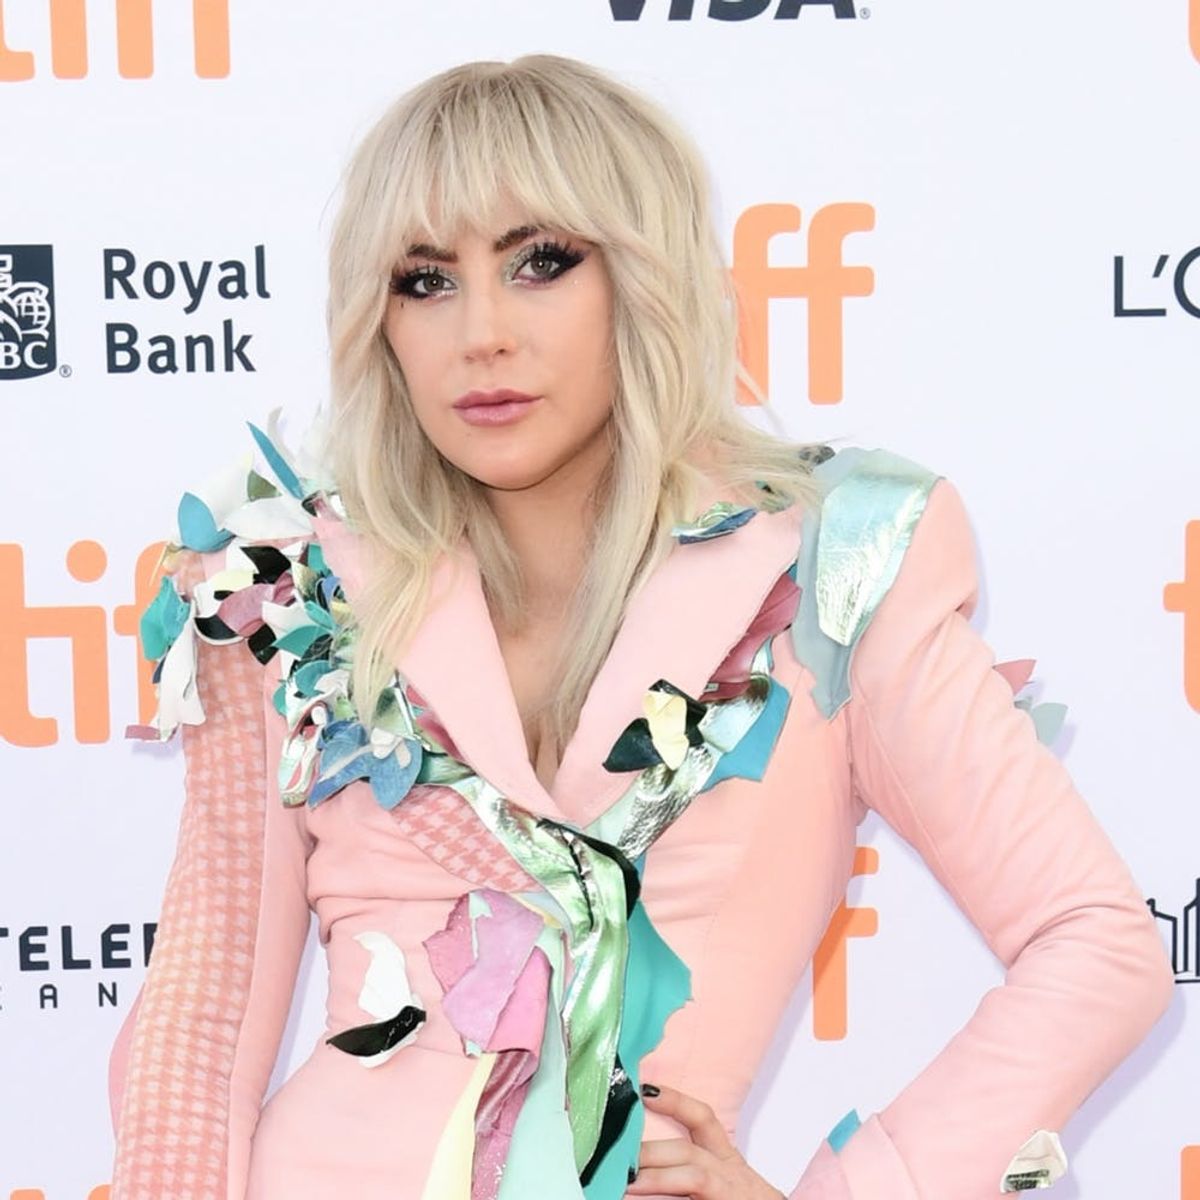 Lady Gaga’s Sweet Message to Selena Gomez Will Leave You Teary-Eyed